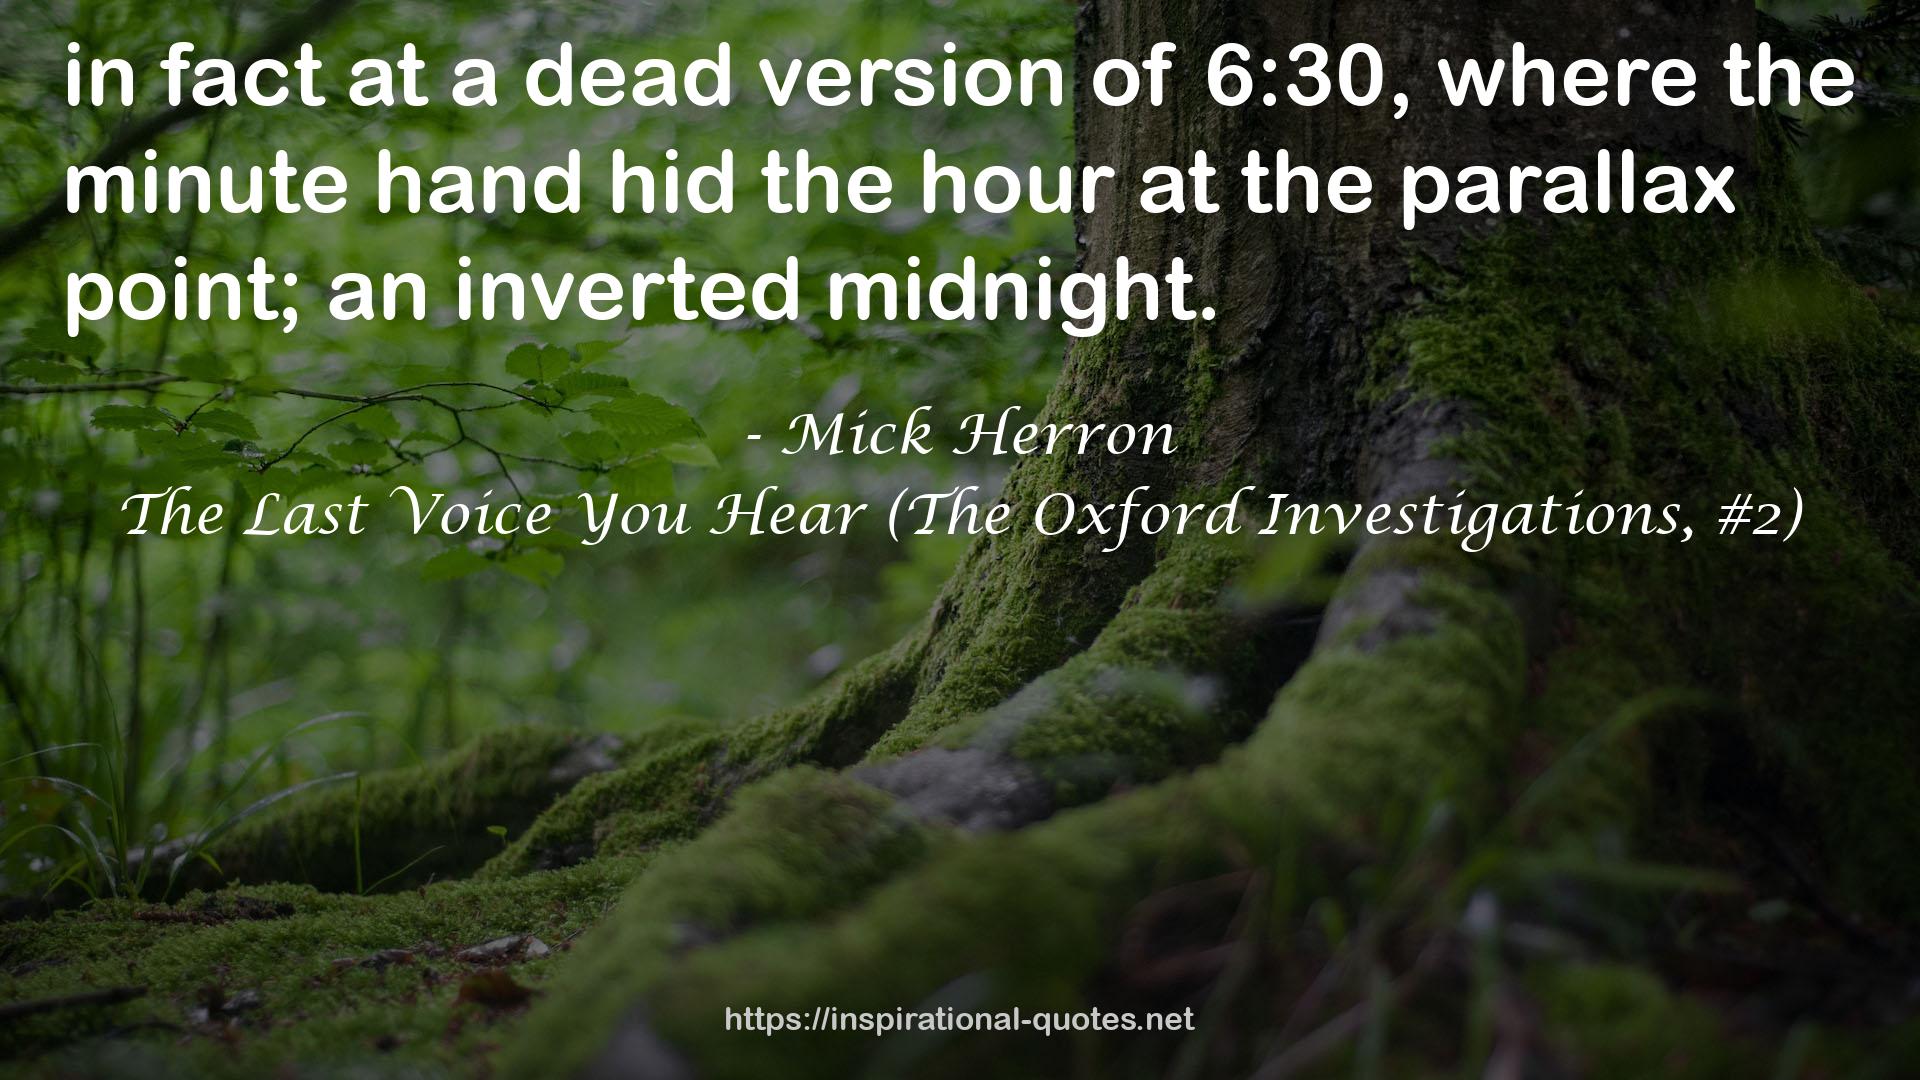 The Last Voice You Hear (The Oxford Investigations, #2) QUOTES